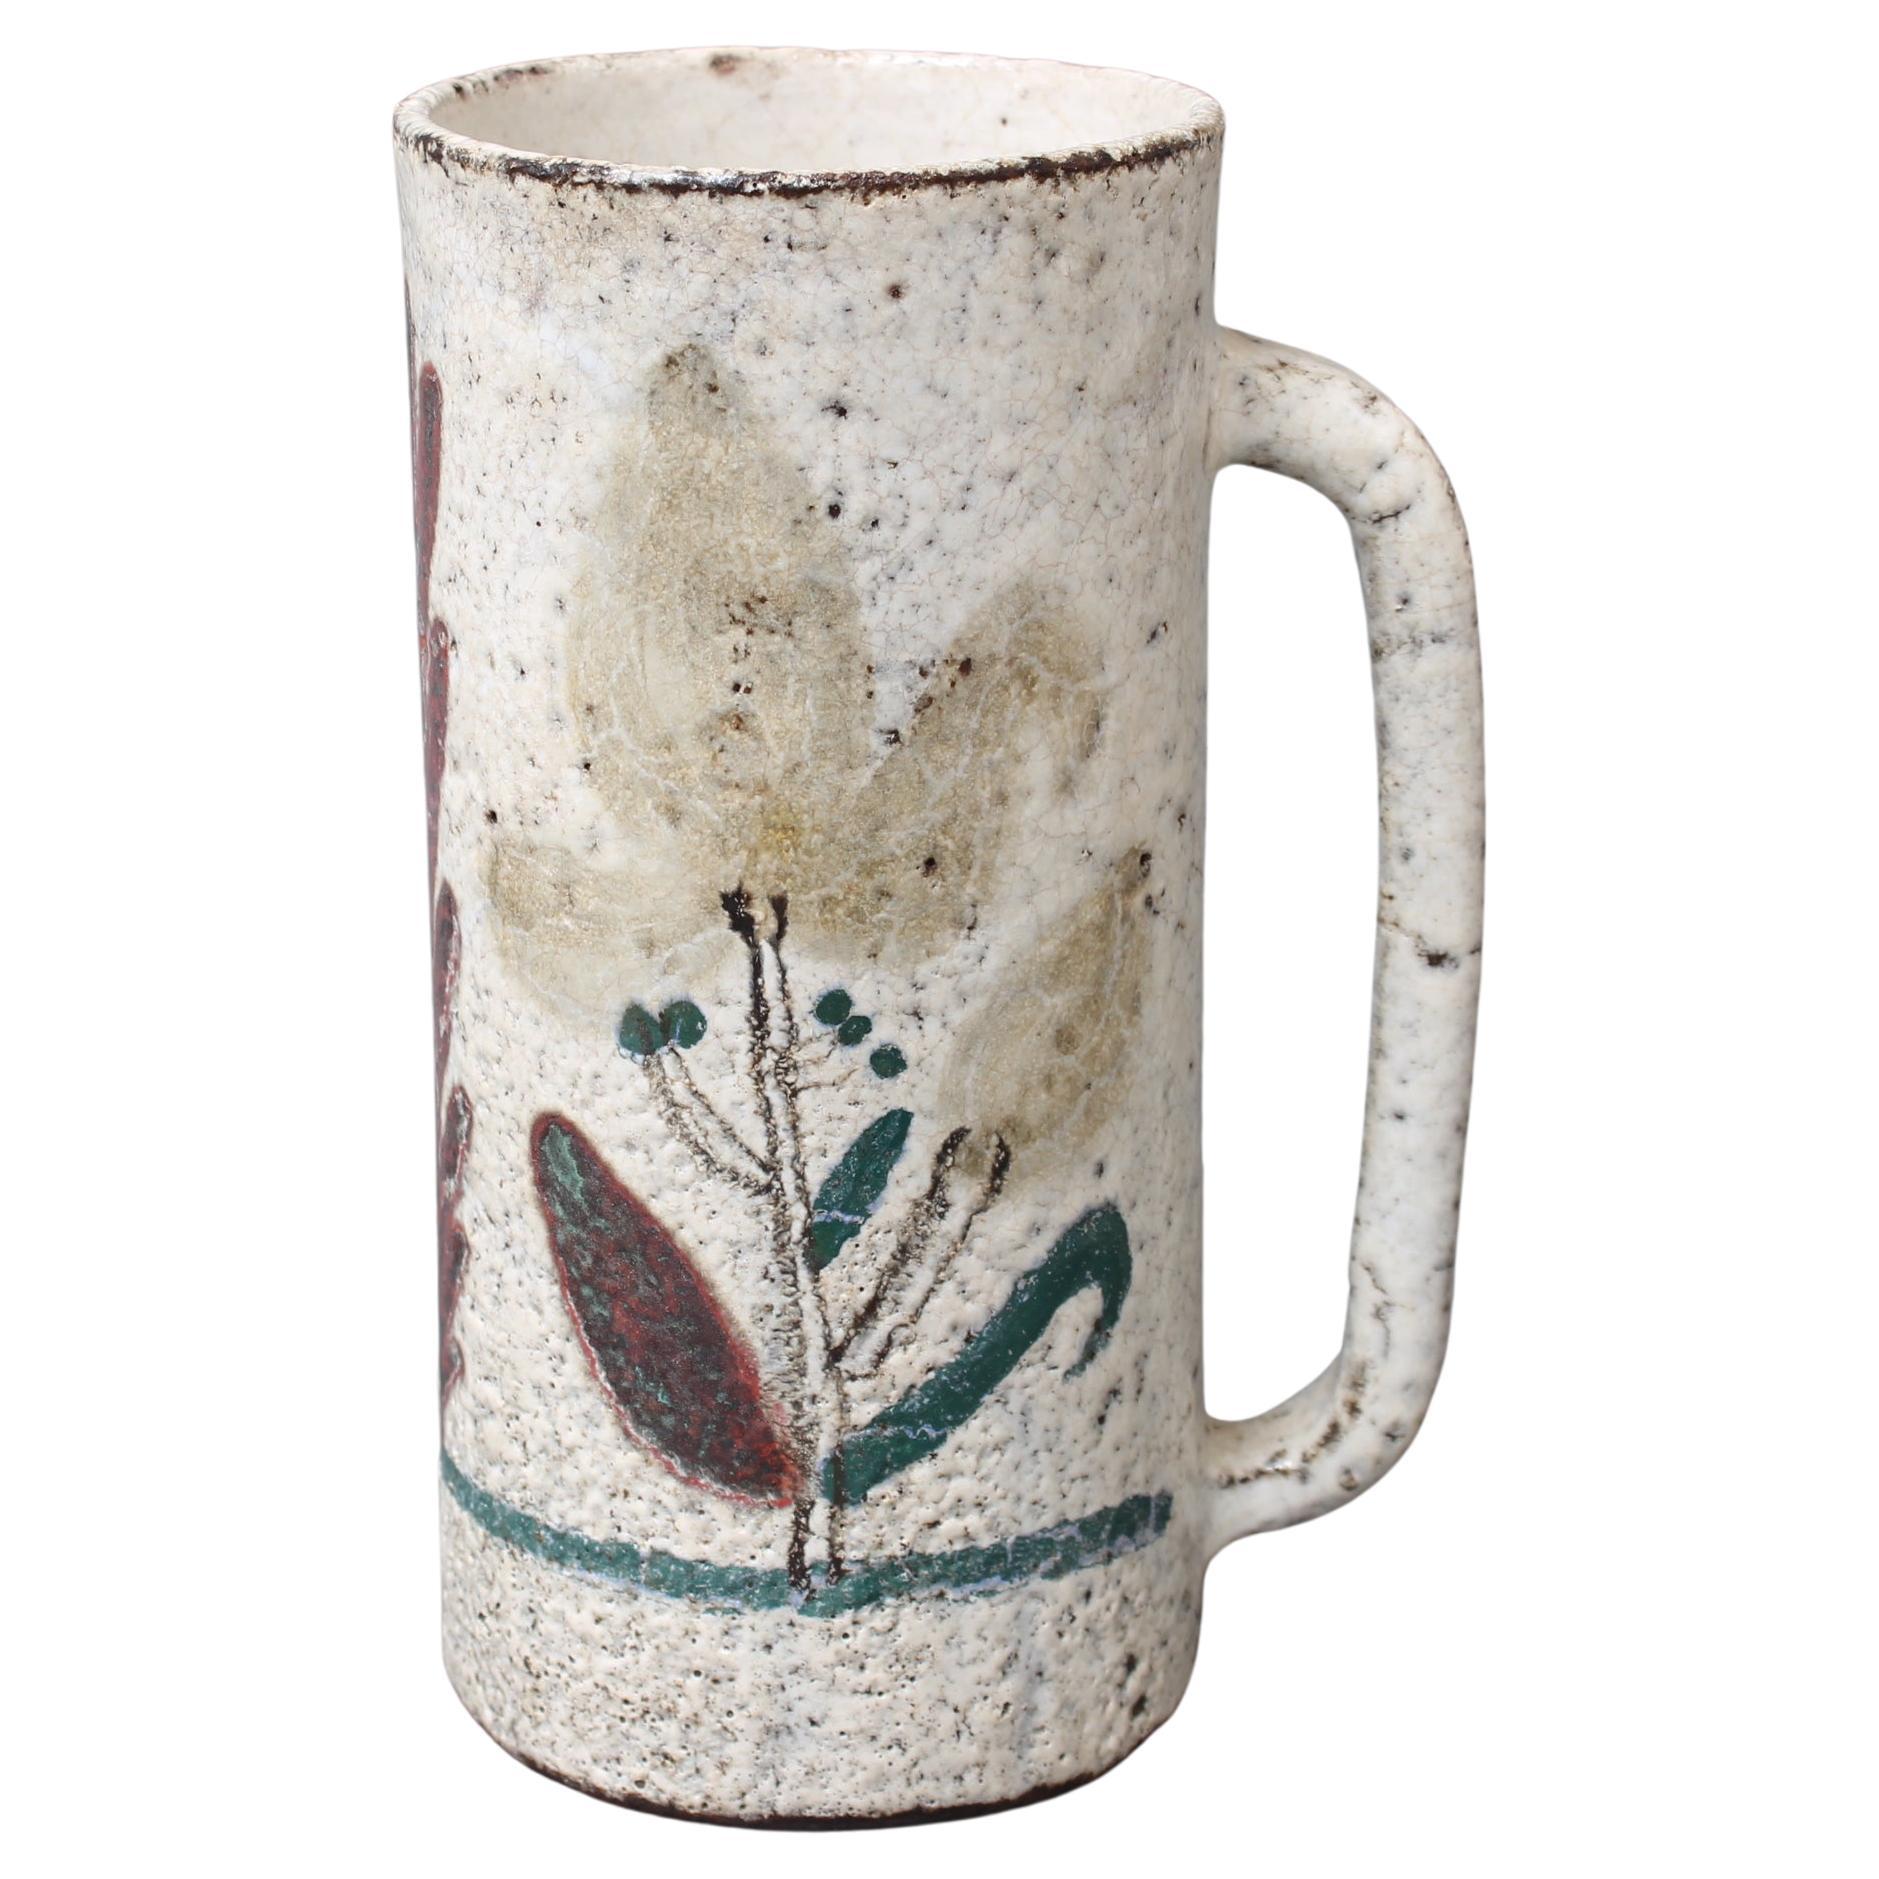 Vintage French Decorative Stein by Gustave Reynaud for Le Mûrier (circa 1960s) en vente